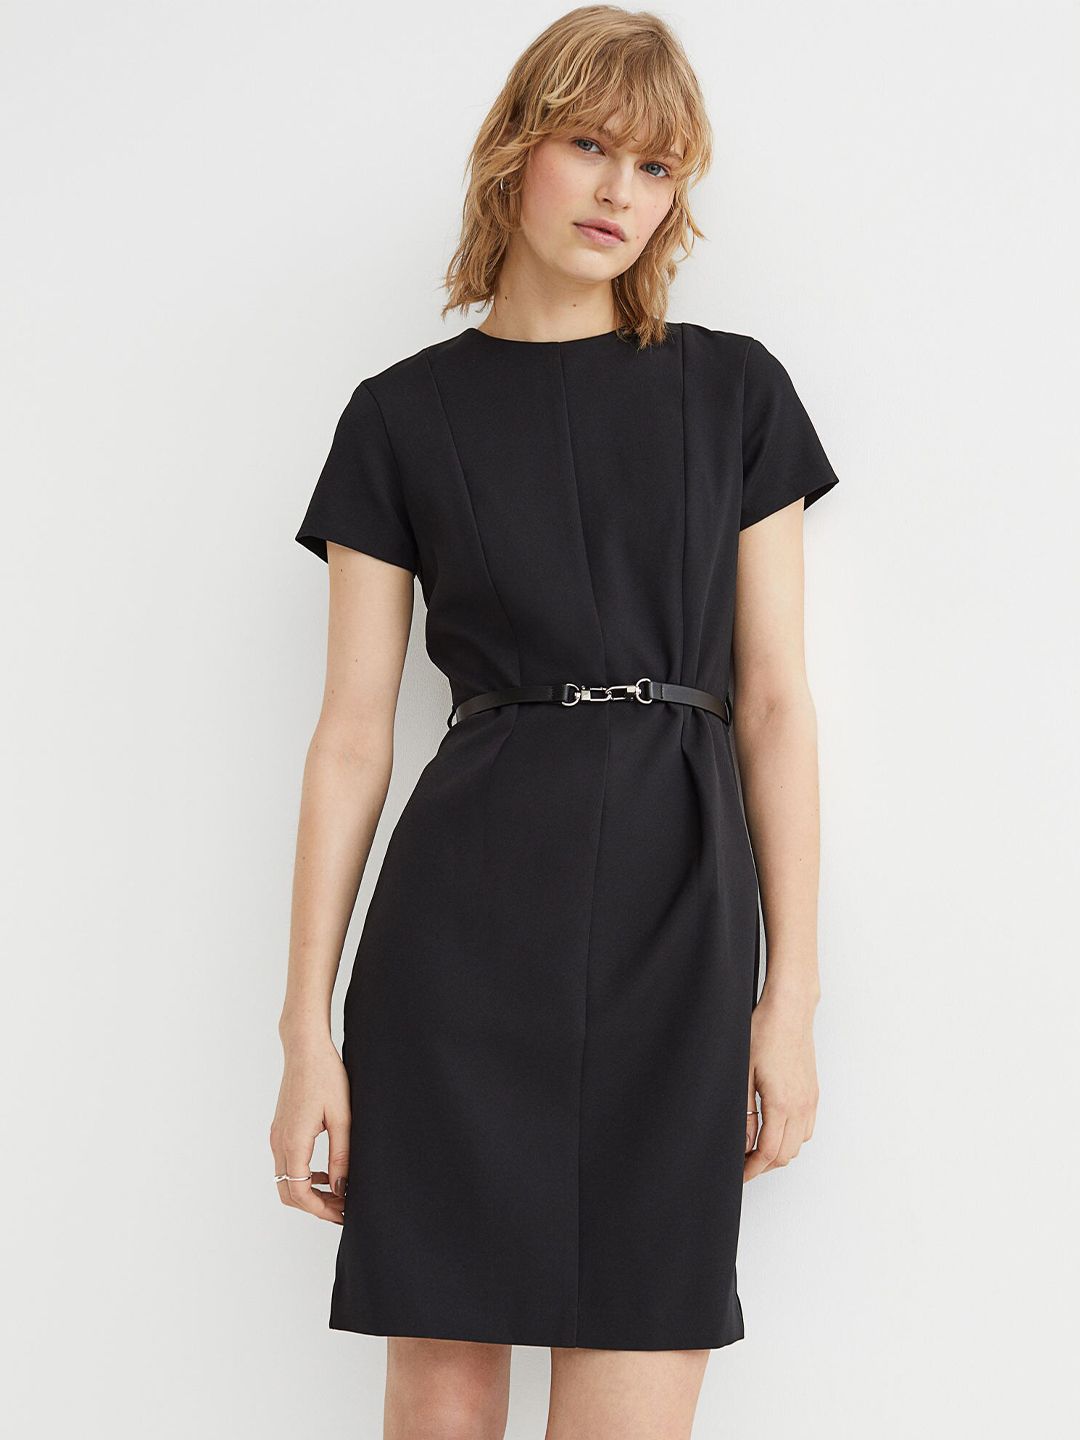 H&M Black Smart Belted Dress Price in India